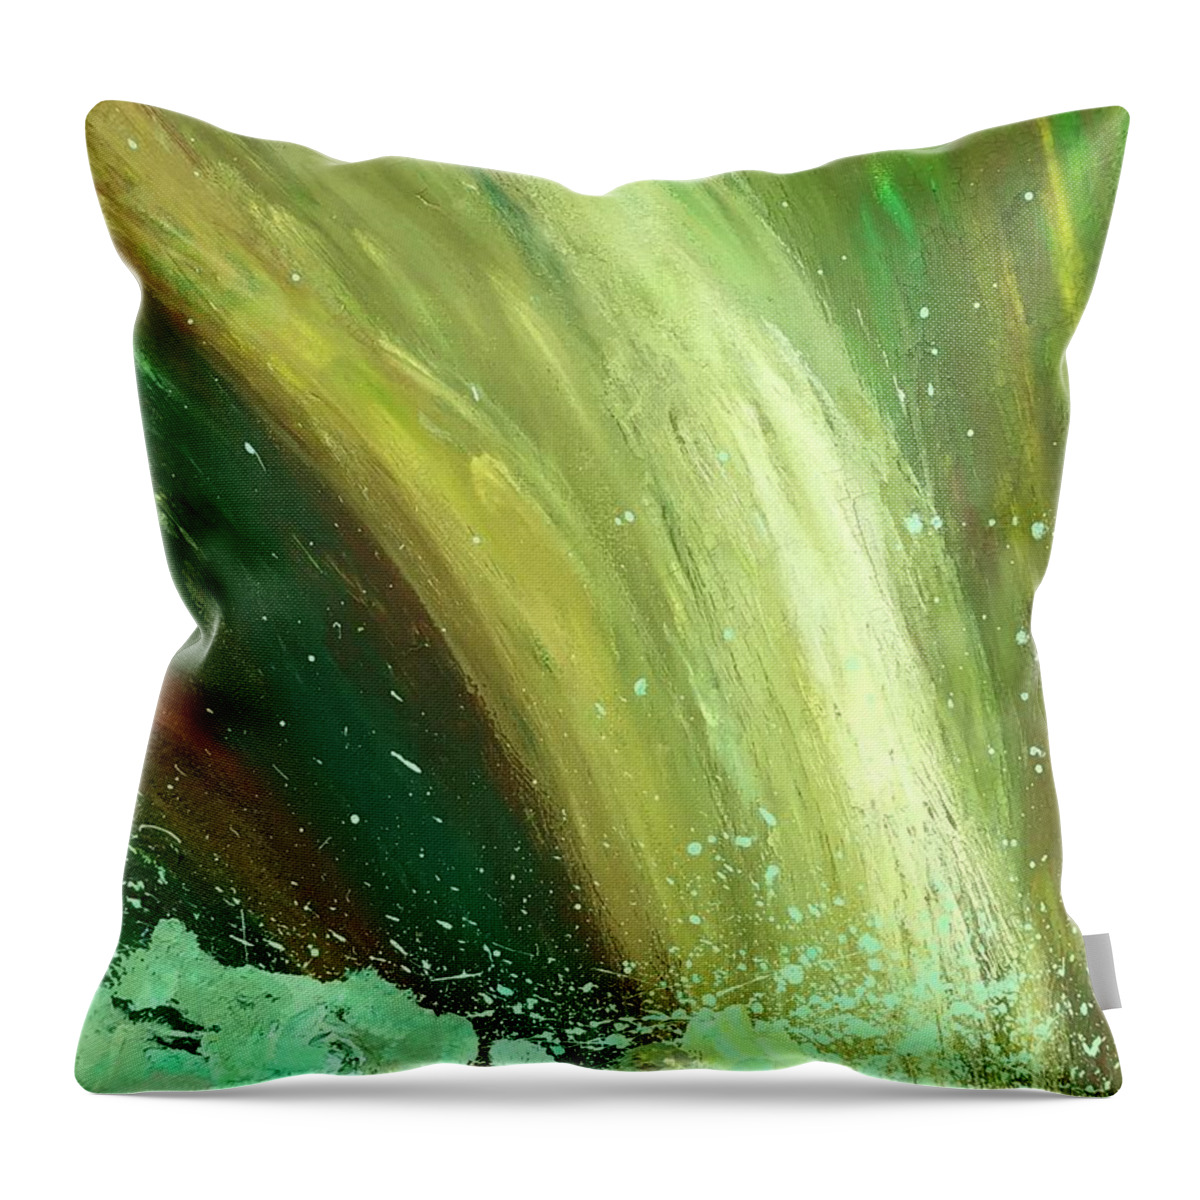 Watercolors Throw Pillow featuring the painting Waterfalls by Karen Nicholson